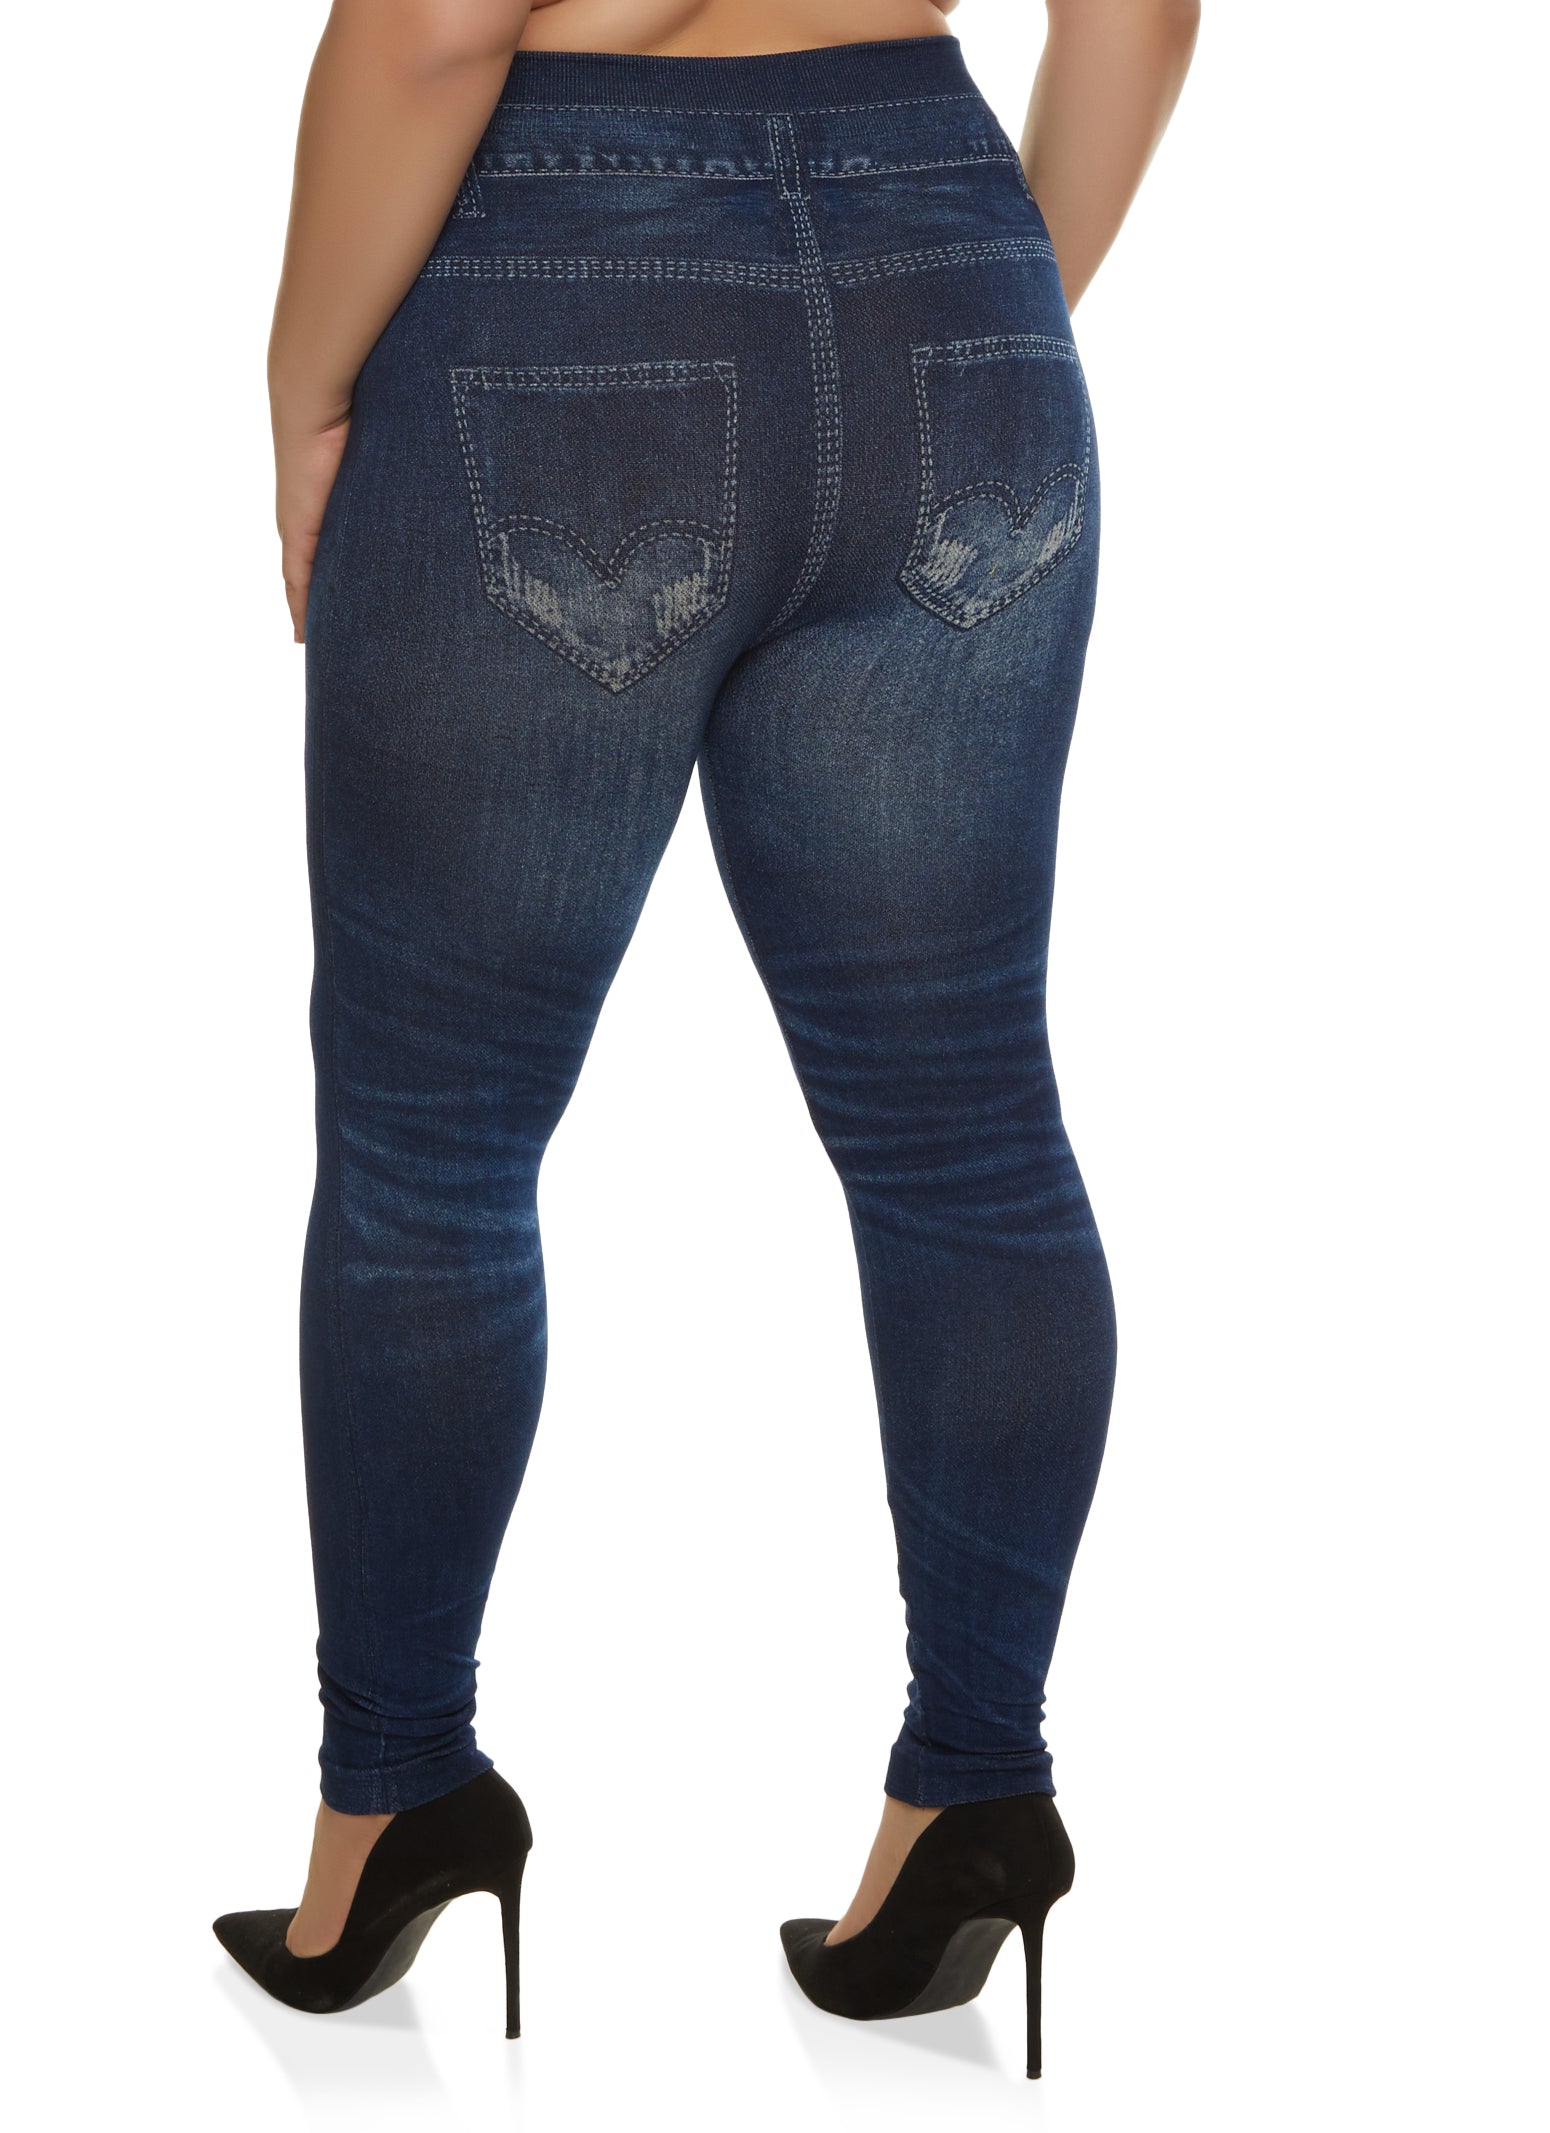 Plus Size Plain Jeggings with Elasticised Waistband and Pocket Detail